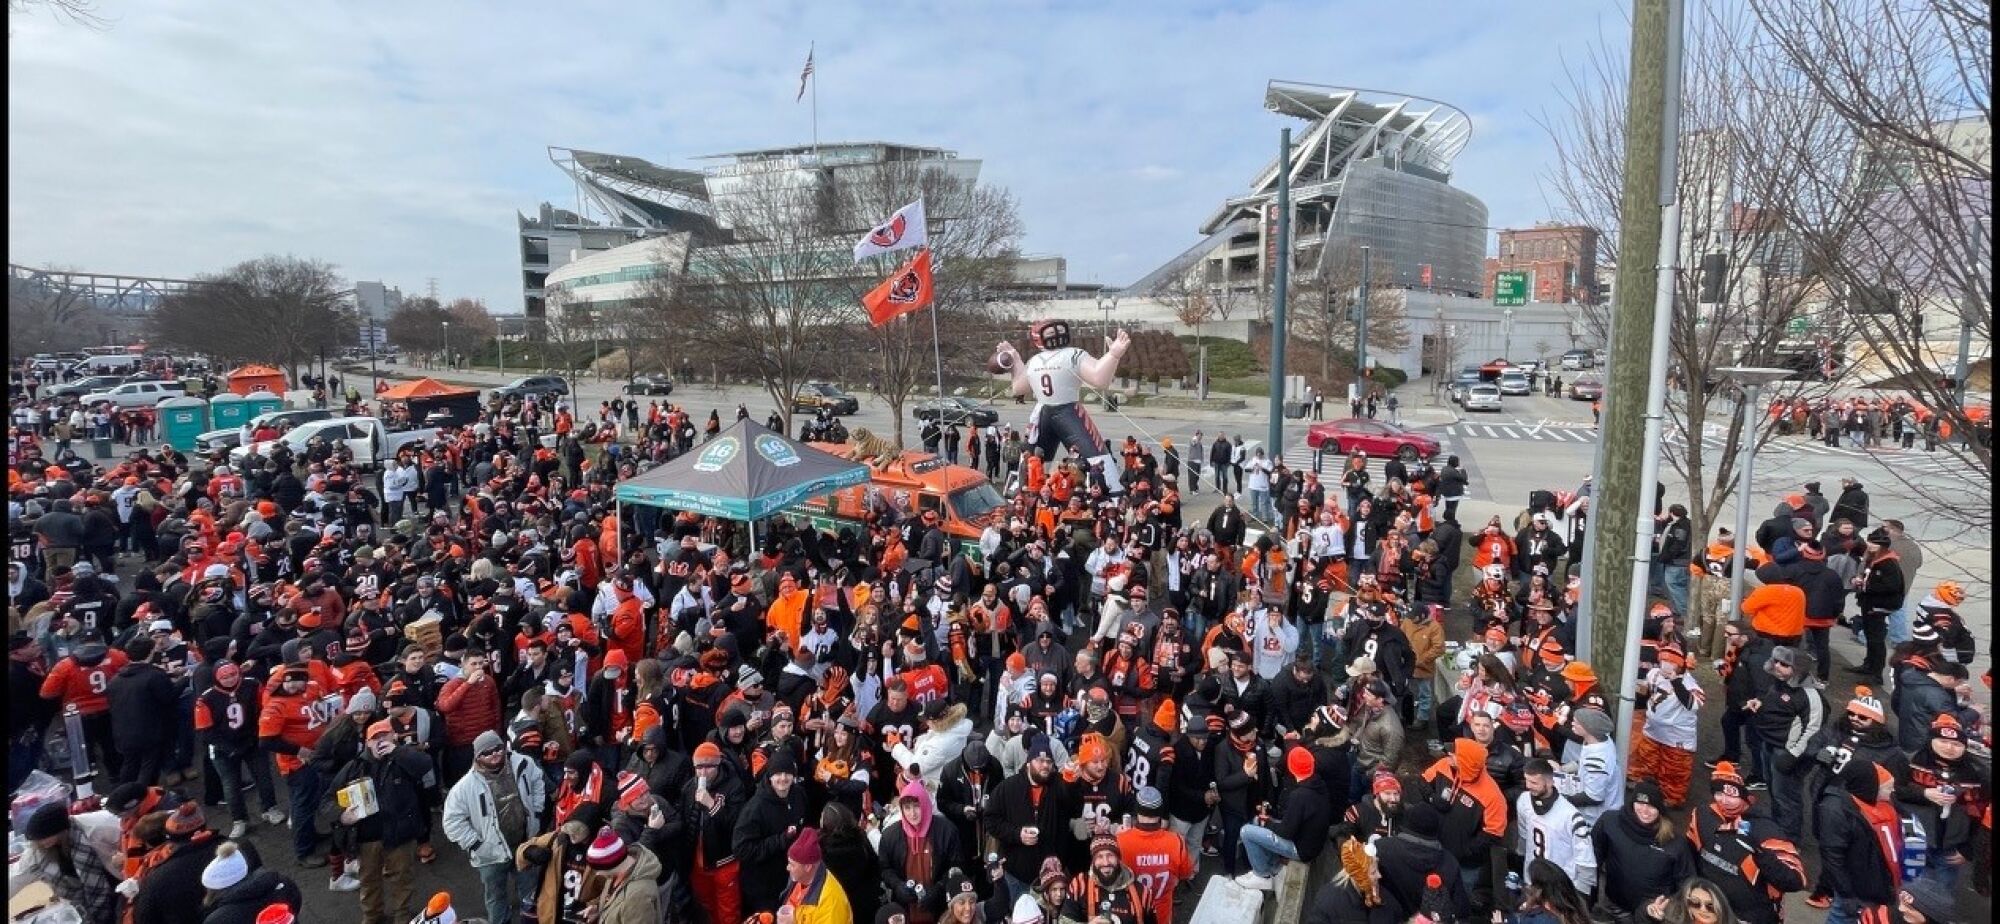 Typical tailgate party for Bengals fan Jim Foster just outside the stadium.